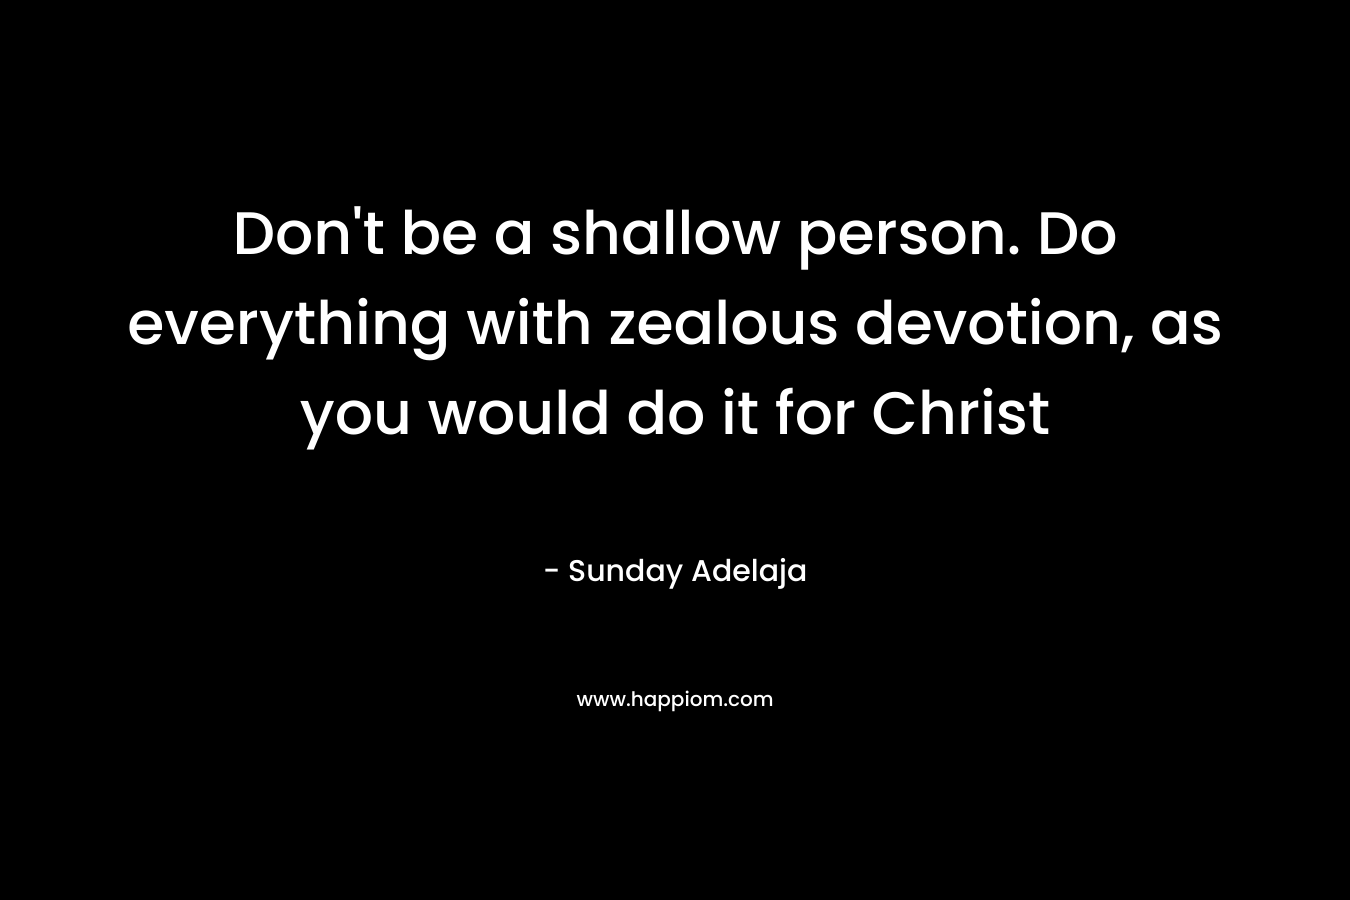 Don’t be a shallow person. Do everything with zealous devotion, as you would do it for Christ – Sunday Adelaja